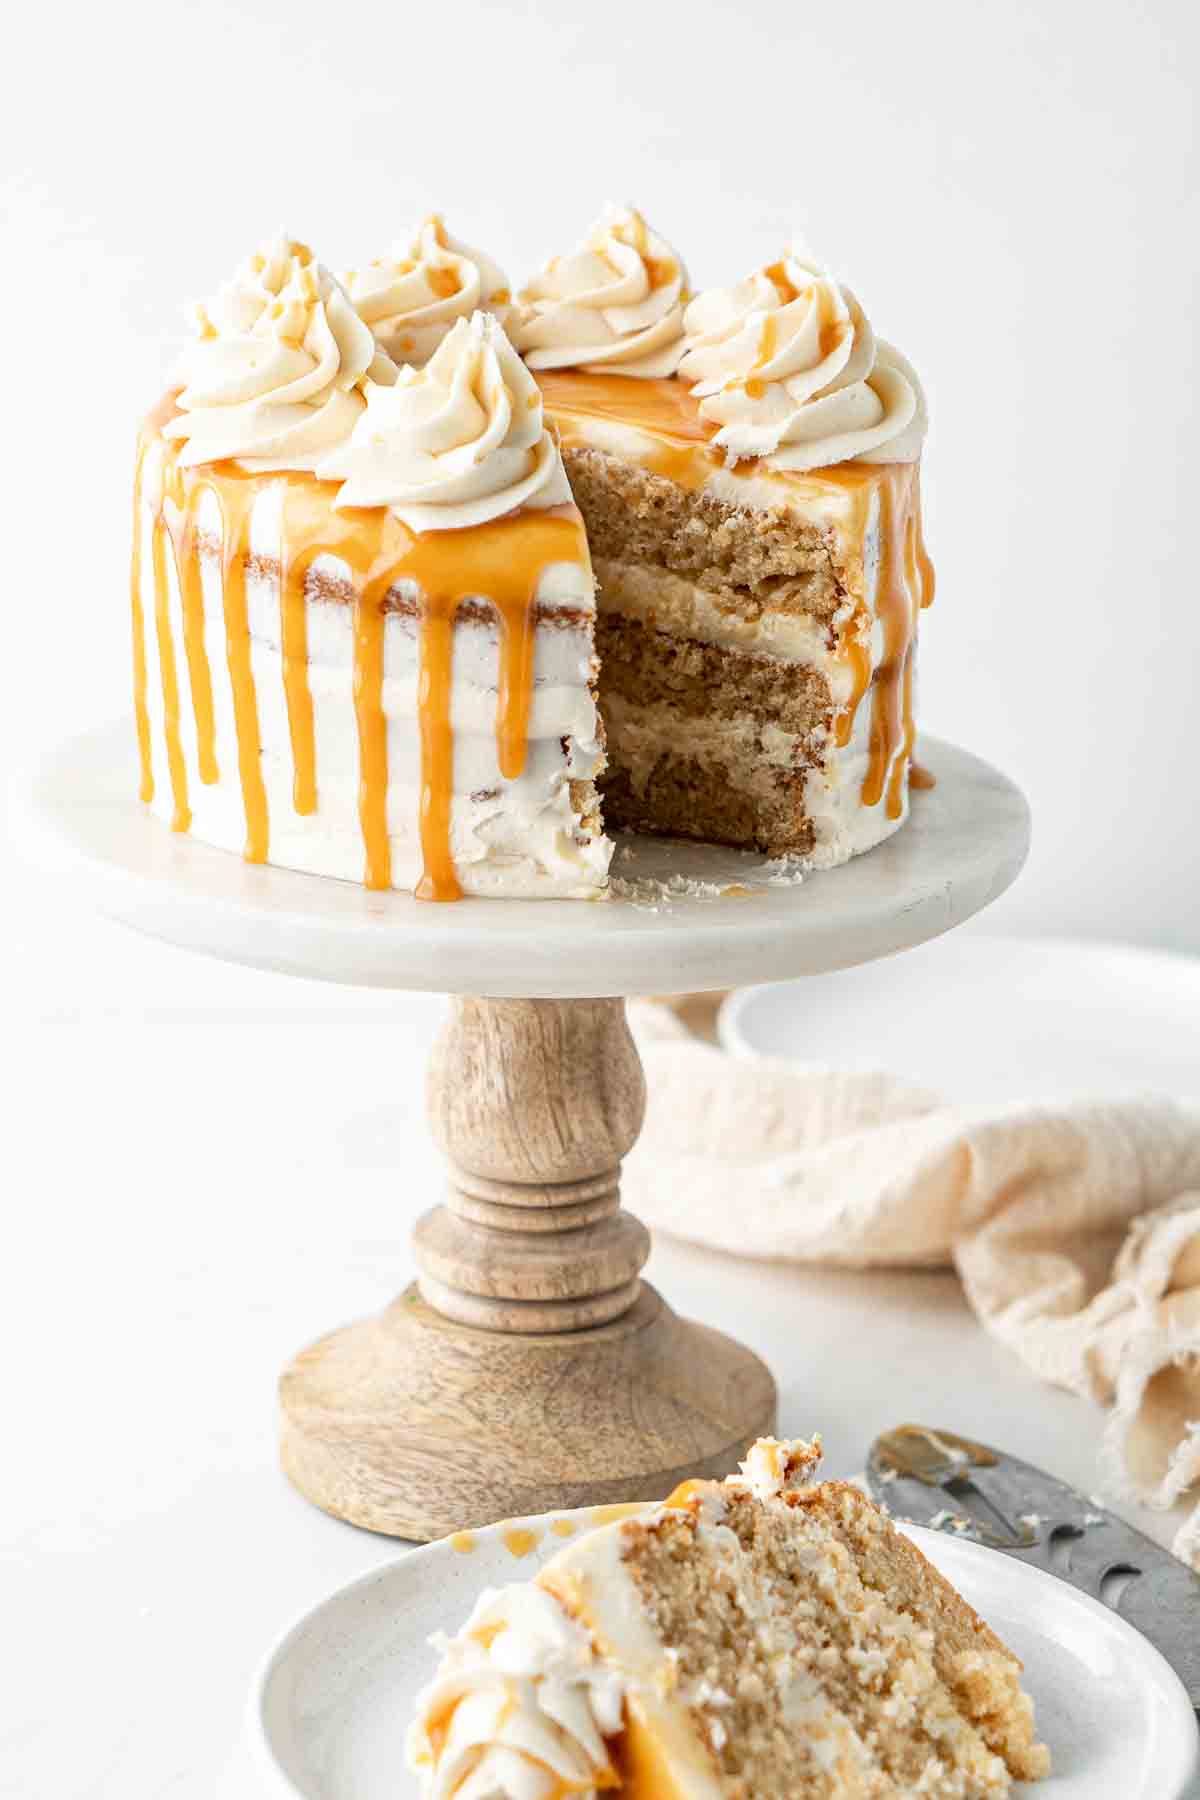 Vegan caramel cake on a cake stand with a slice cut.